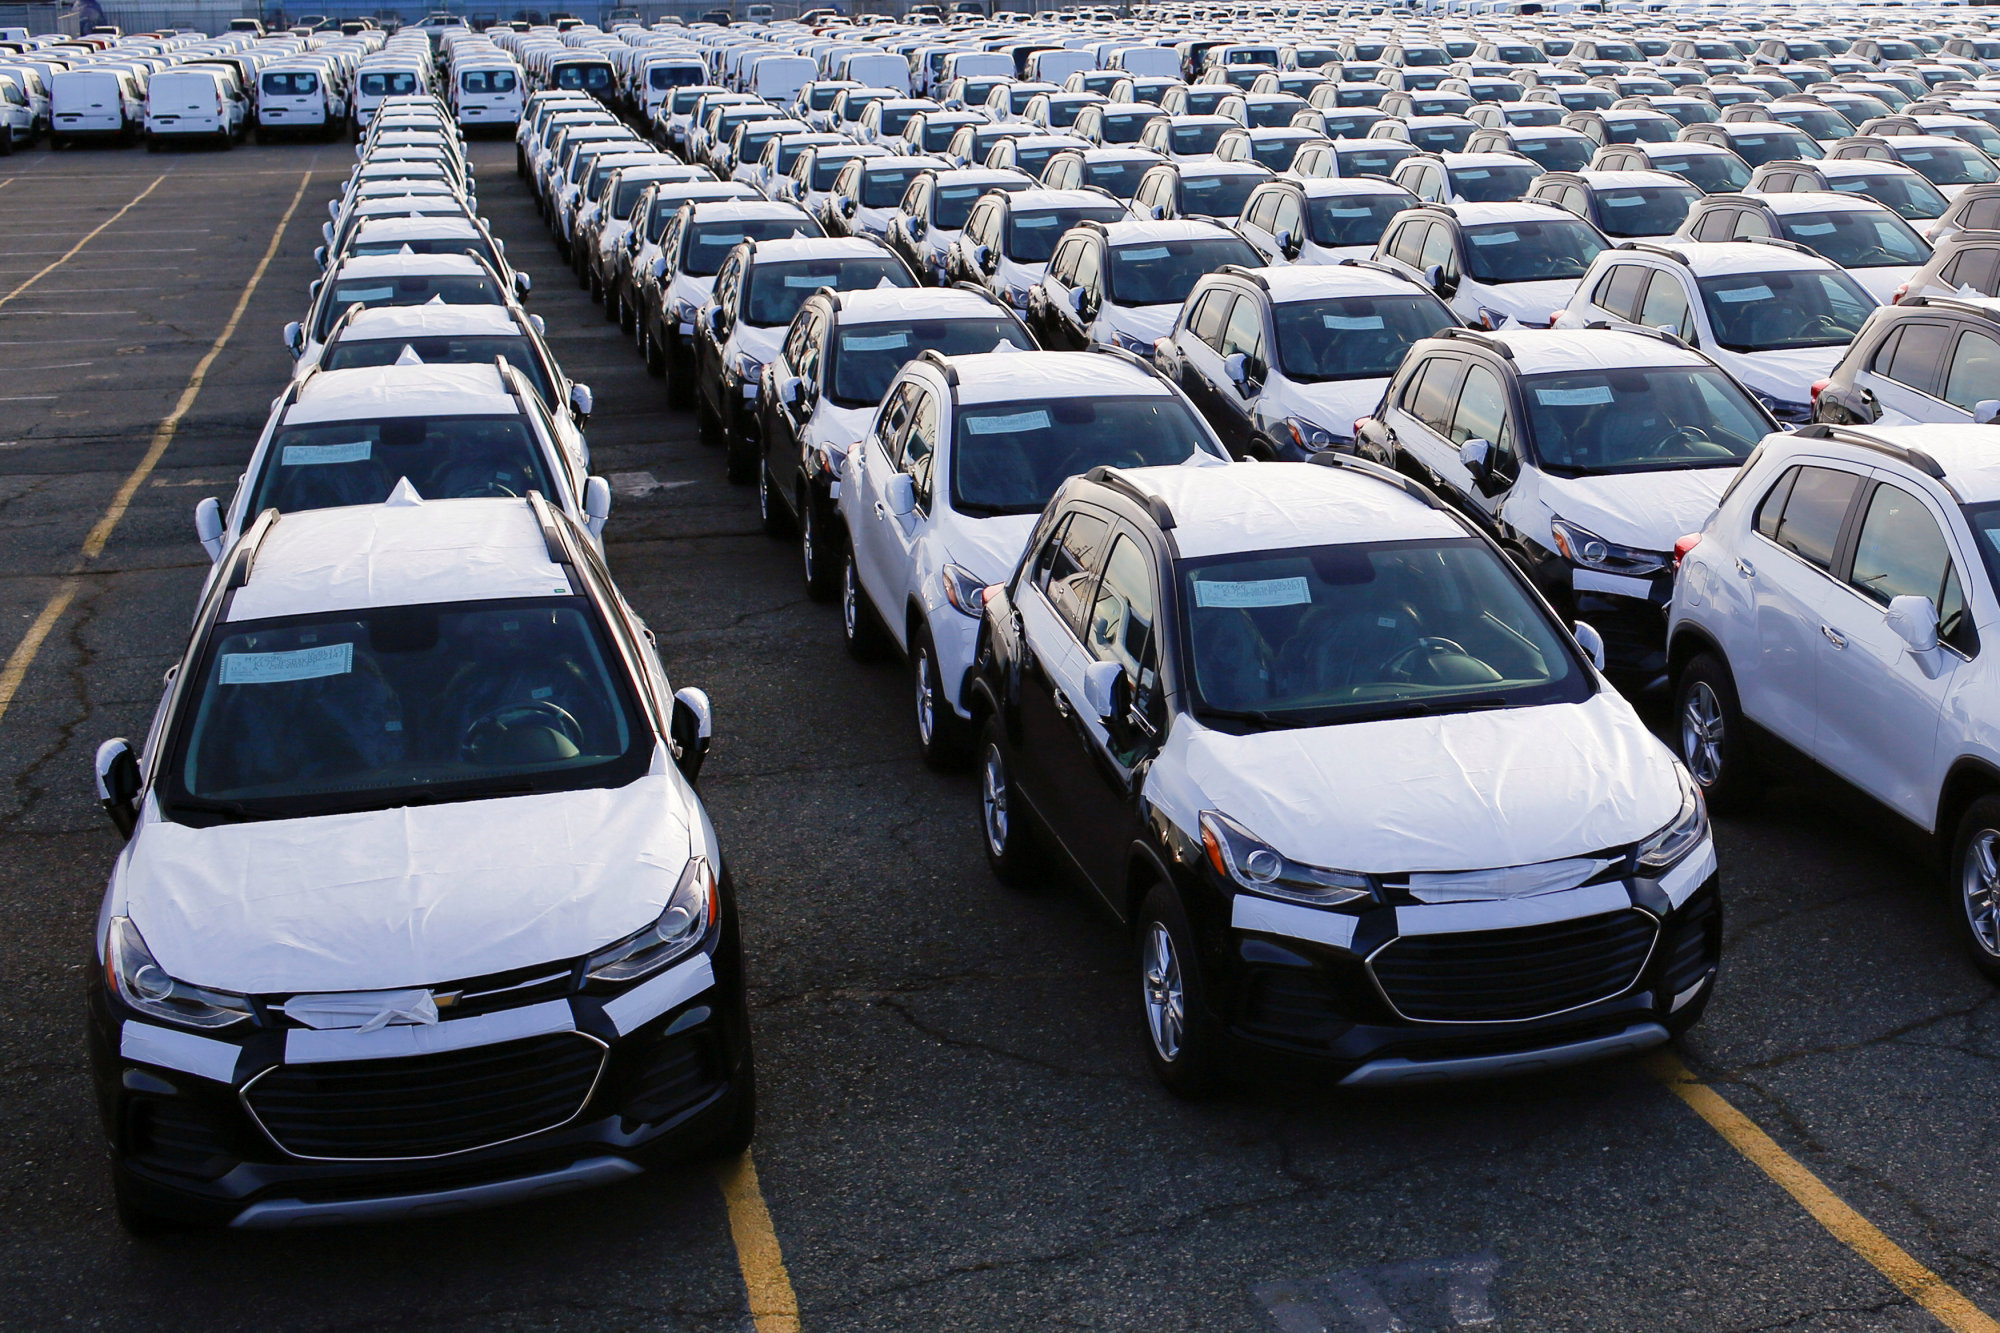 Imported automobiles at the port of Newark in New Jersey | REUTERS